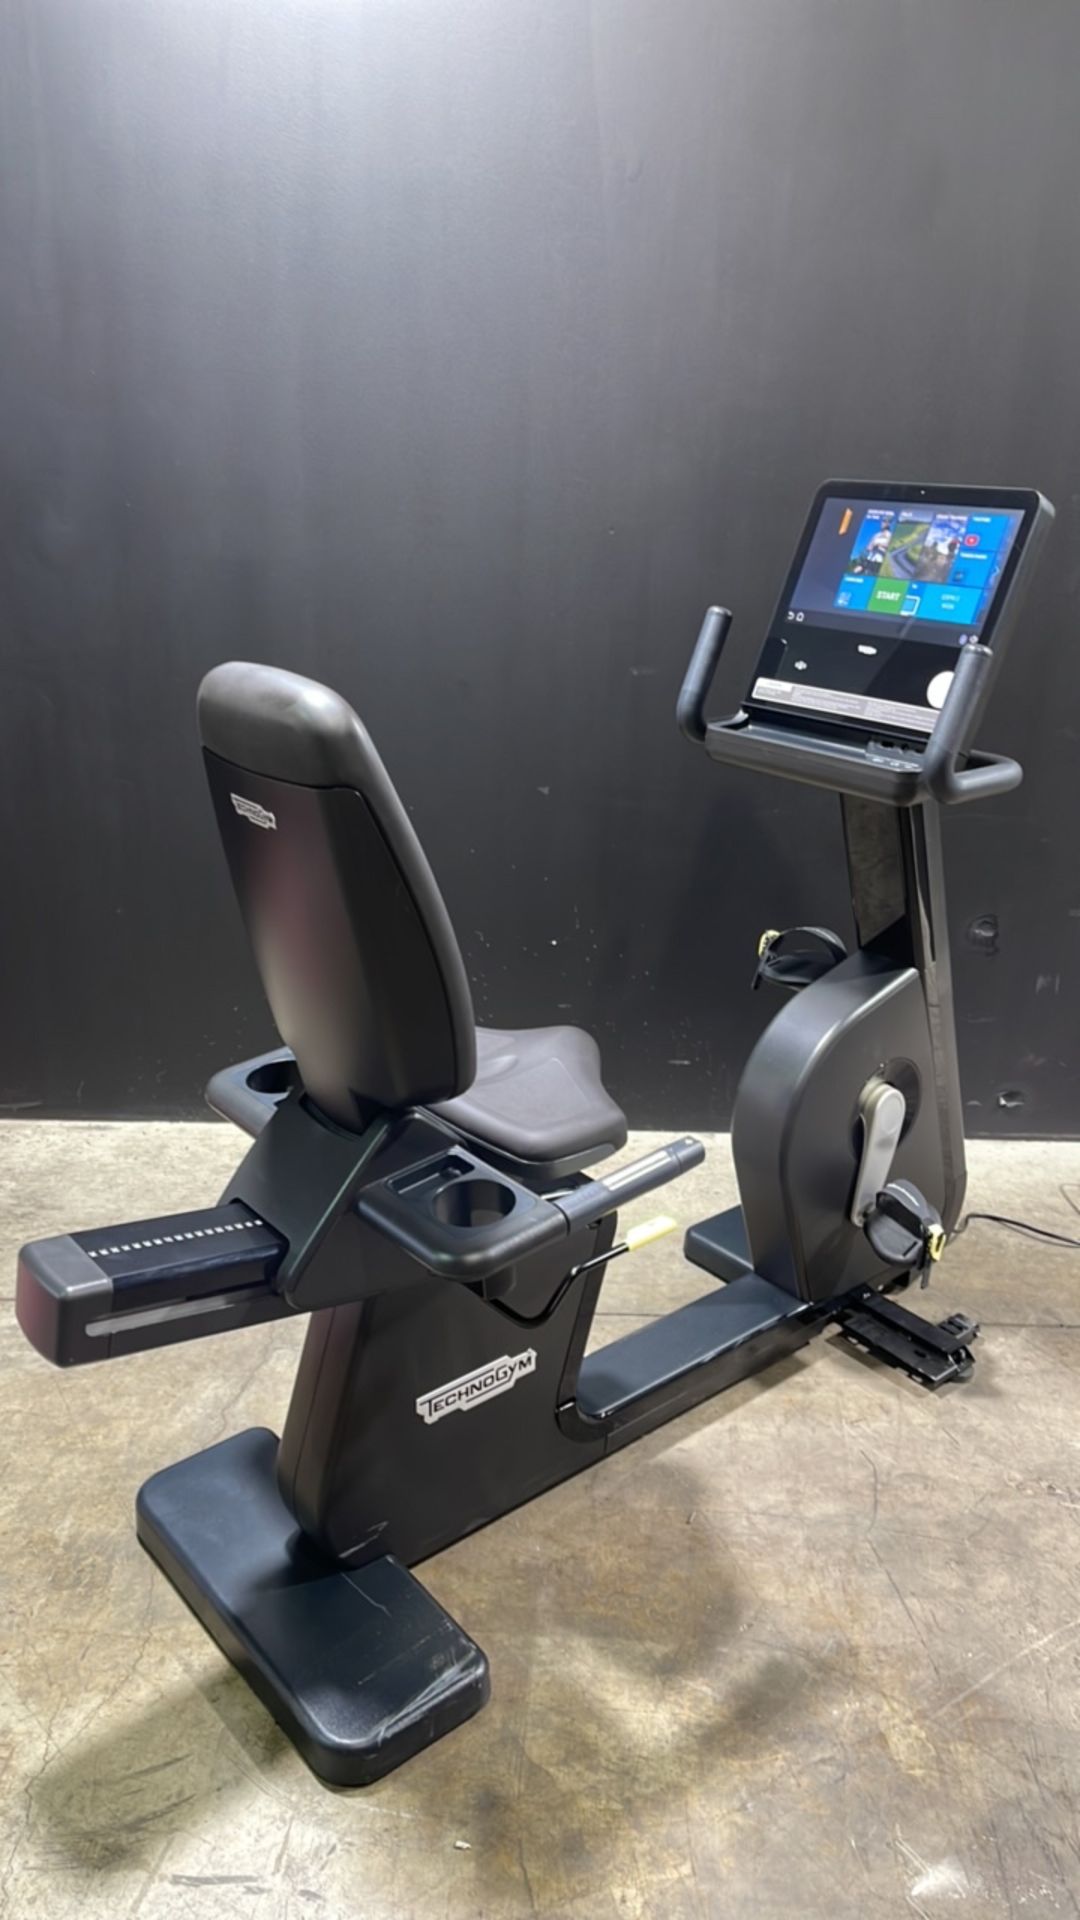 TECHNOGYM EXERCISE BIKE WITH TOUCH SCREEN MONITOR - Image 2 of 4